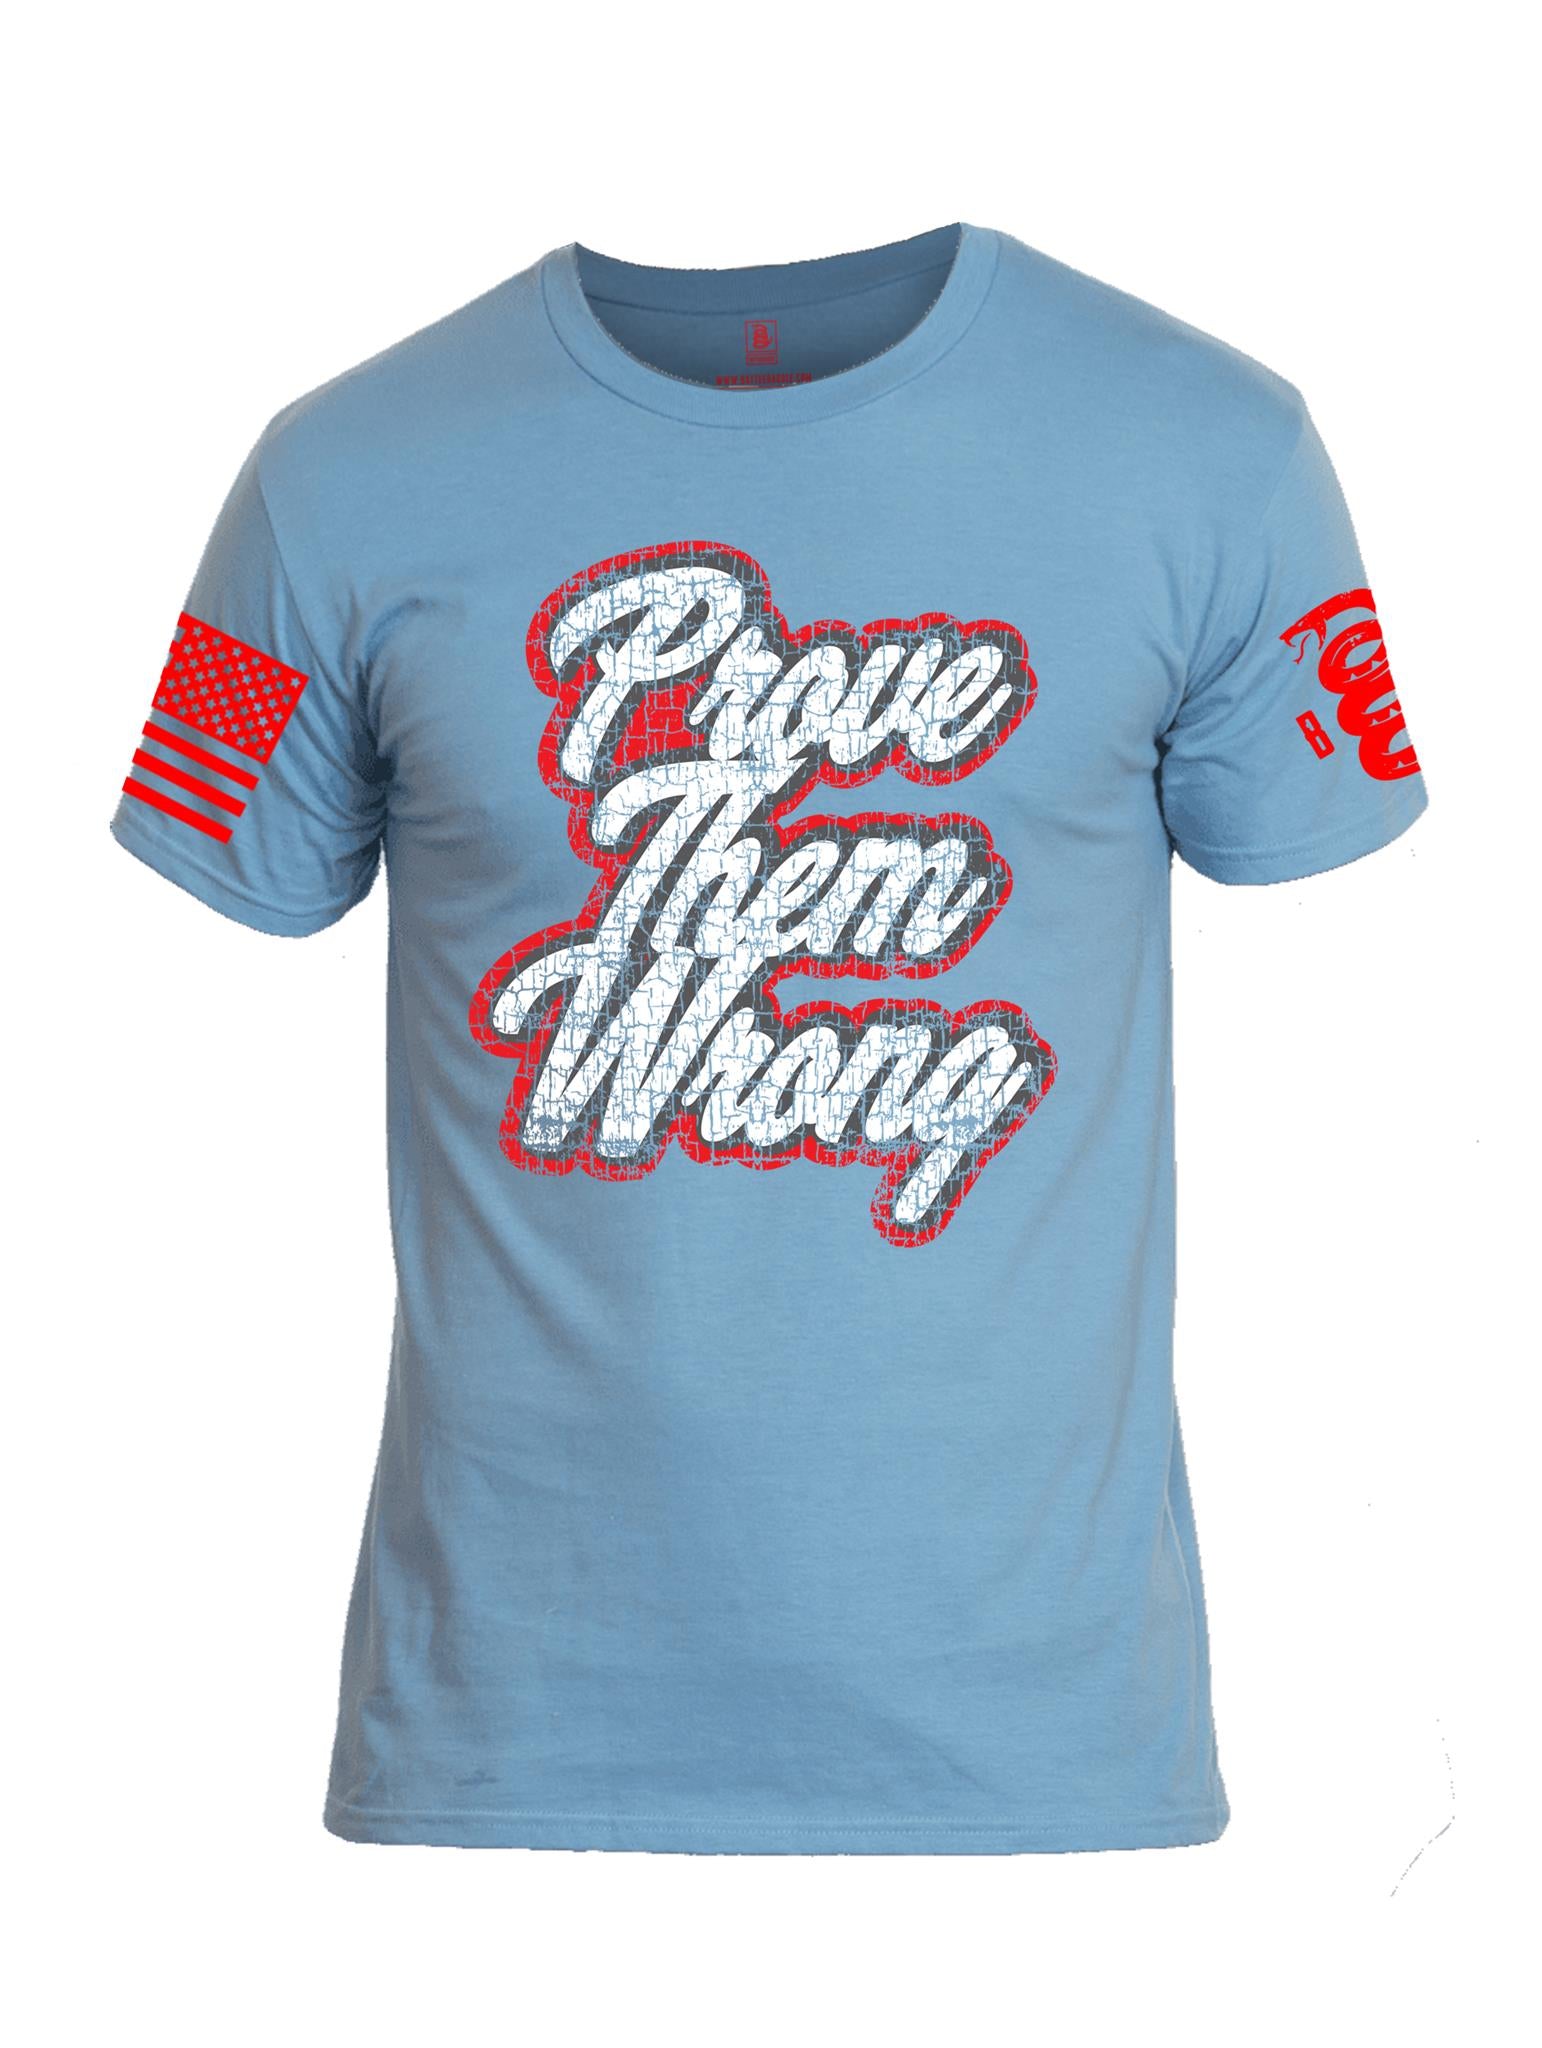 Battleraddle Prove Them Wrong Red Sleeve Print Mens Cotton Crew Neck T Shirt